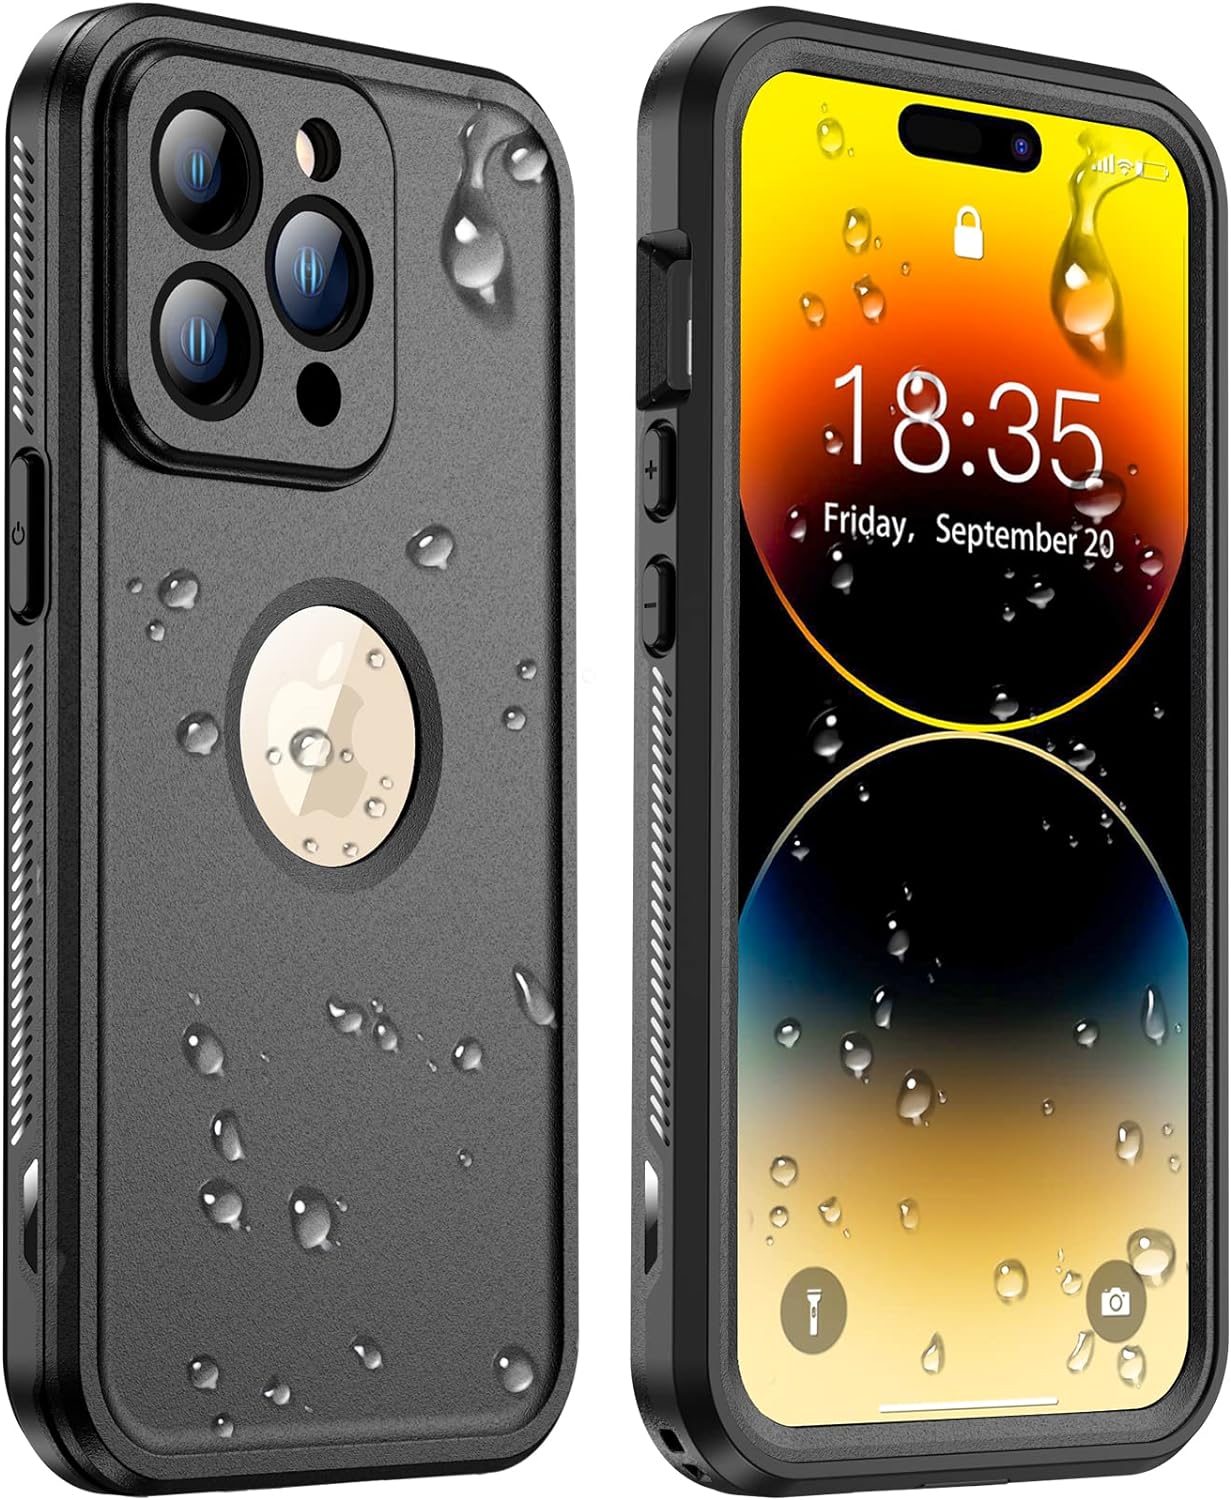 Temdan [Real 360 for iPhone 14 Pro Case Waterproof, Built-in 9H Tempered Glass Camera Lens & Screen Protection [14FT Military Dropproof][Full-Body Shockproof Phone Case][Dustproof][IP68 Underwater]